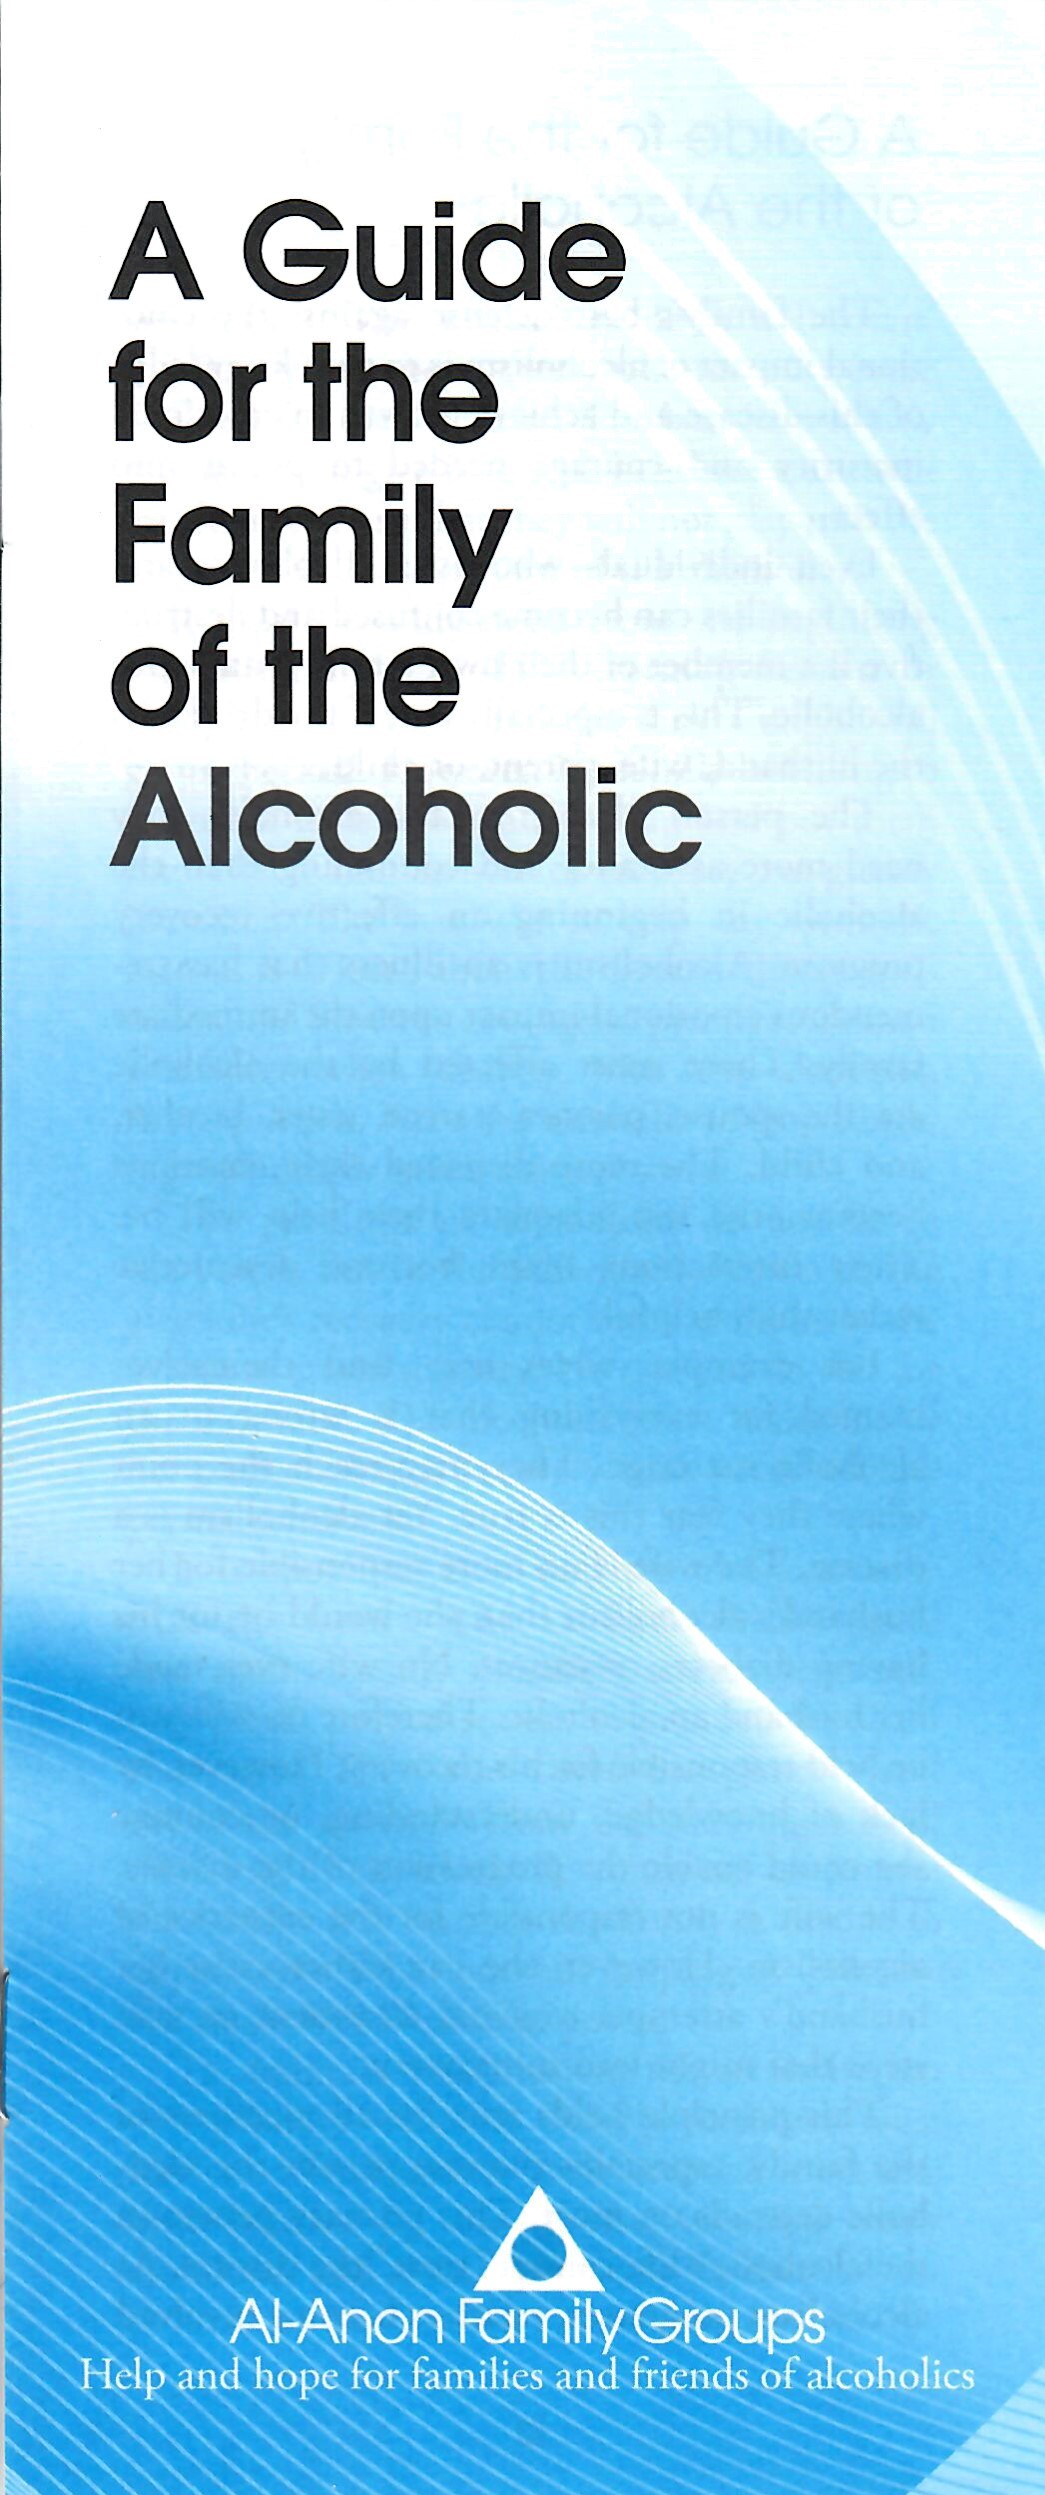 A Guide for the Family of the Alcoholic P-7